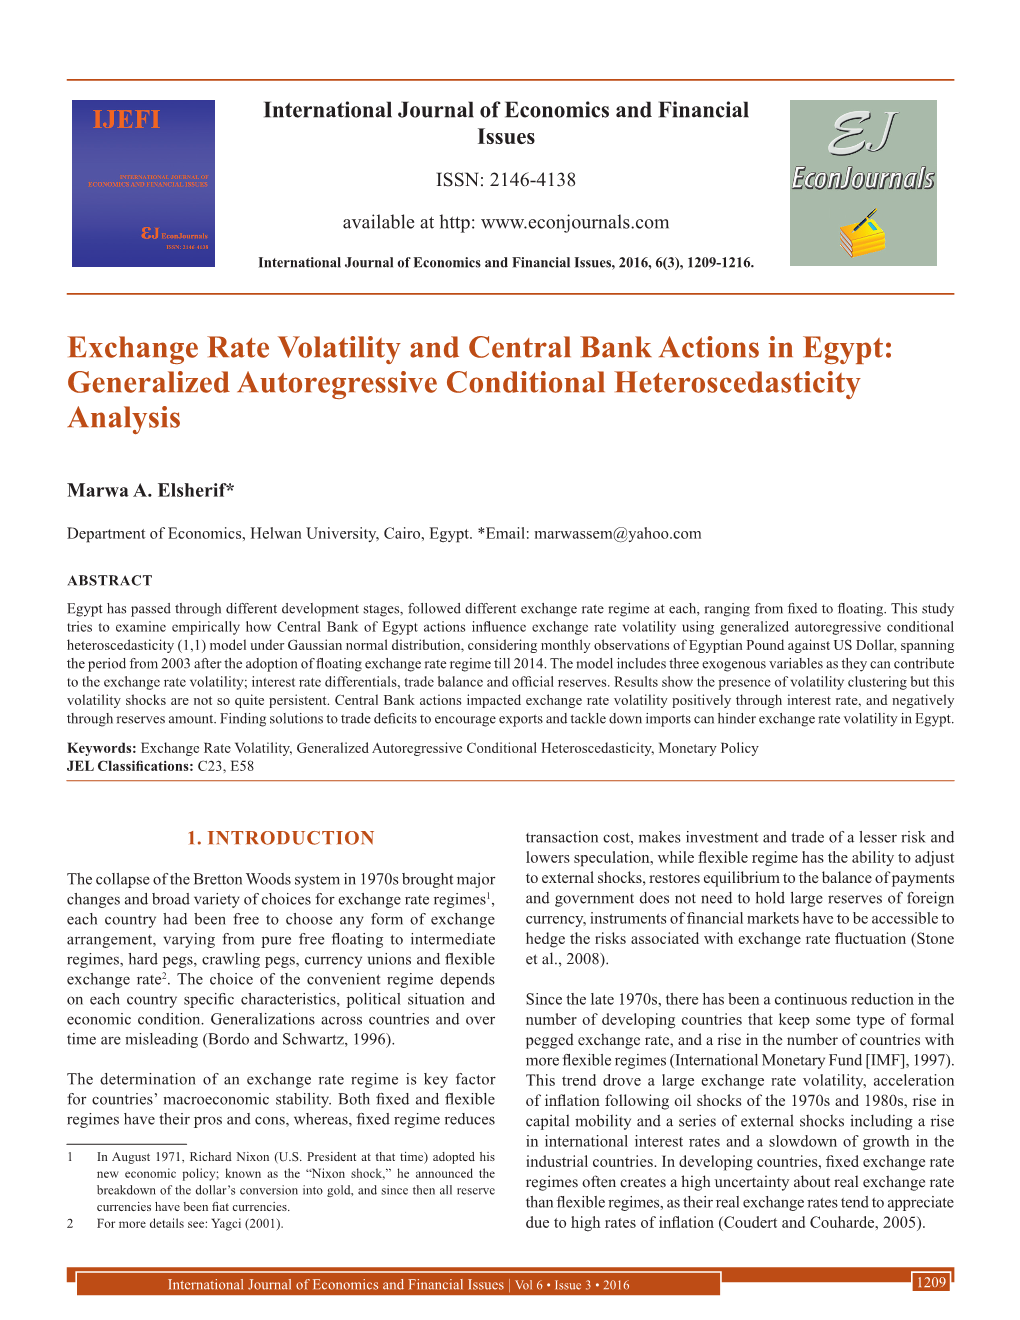 Exchange Rate Volatility and Central Bank Actions in Egypt: Generalized Autoregressive Conditional Heteroscedasticity Analysis